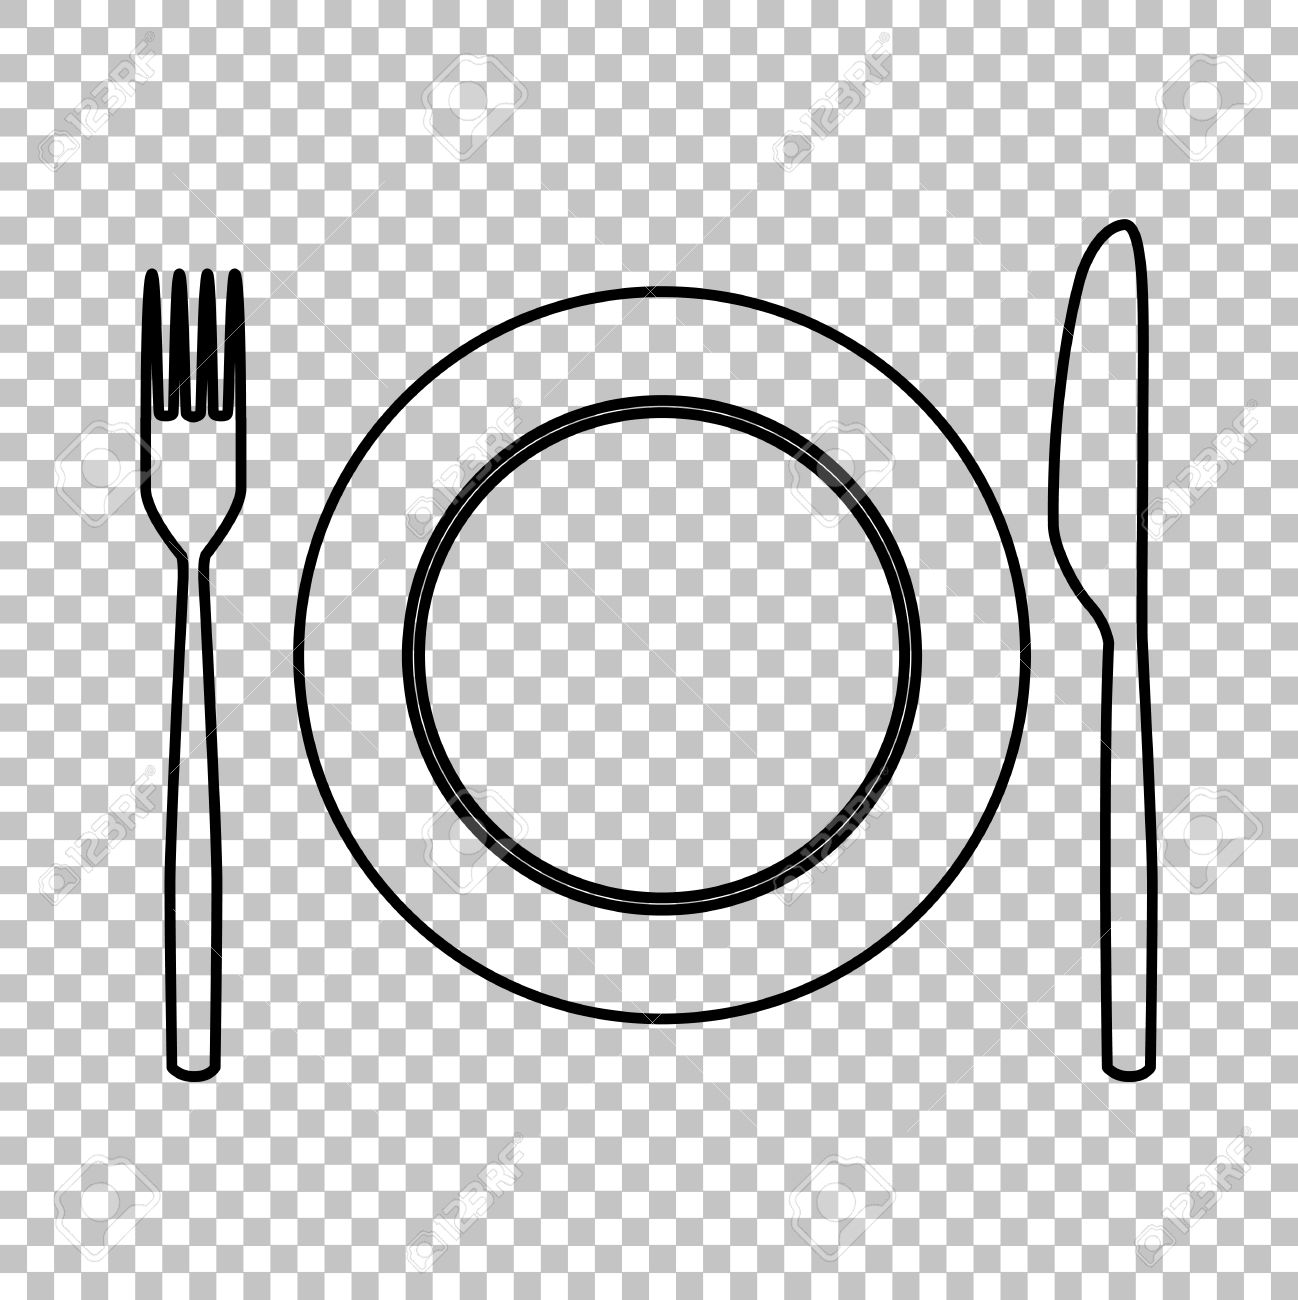 Fork And Knife Line Vector Icon On Transparent Background Royalty